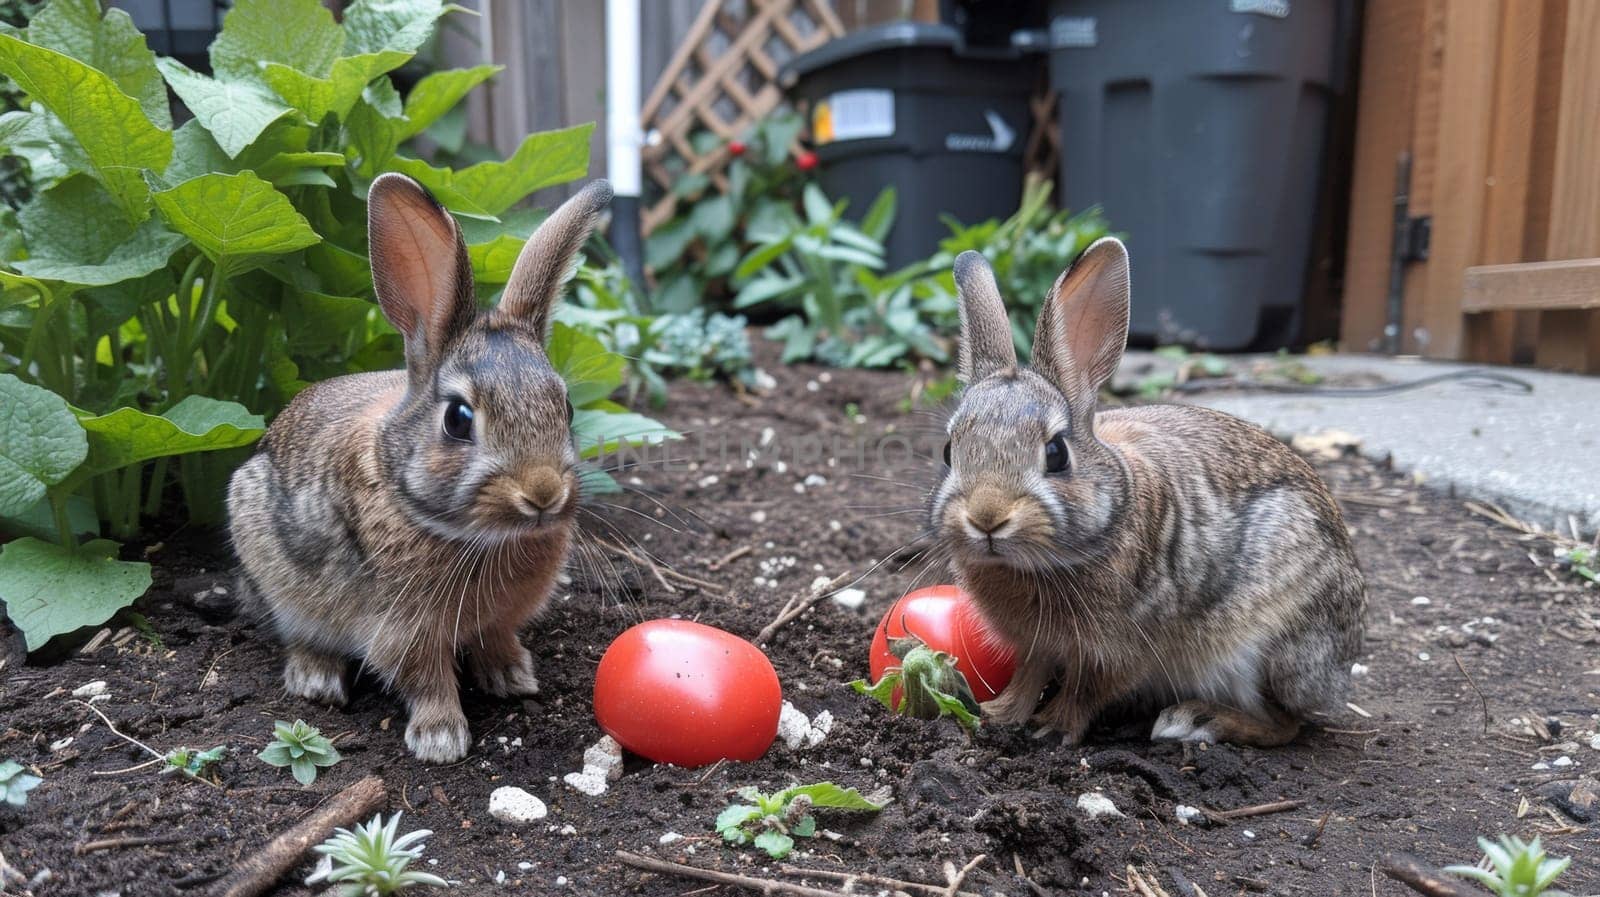 Two rabbits sitting in the dirt next to some tomatoes